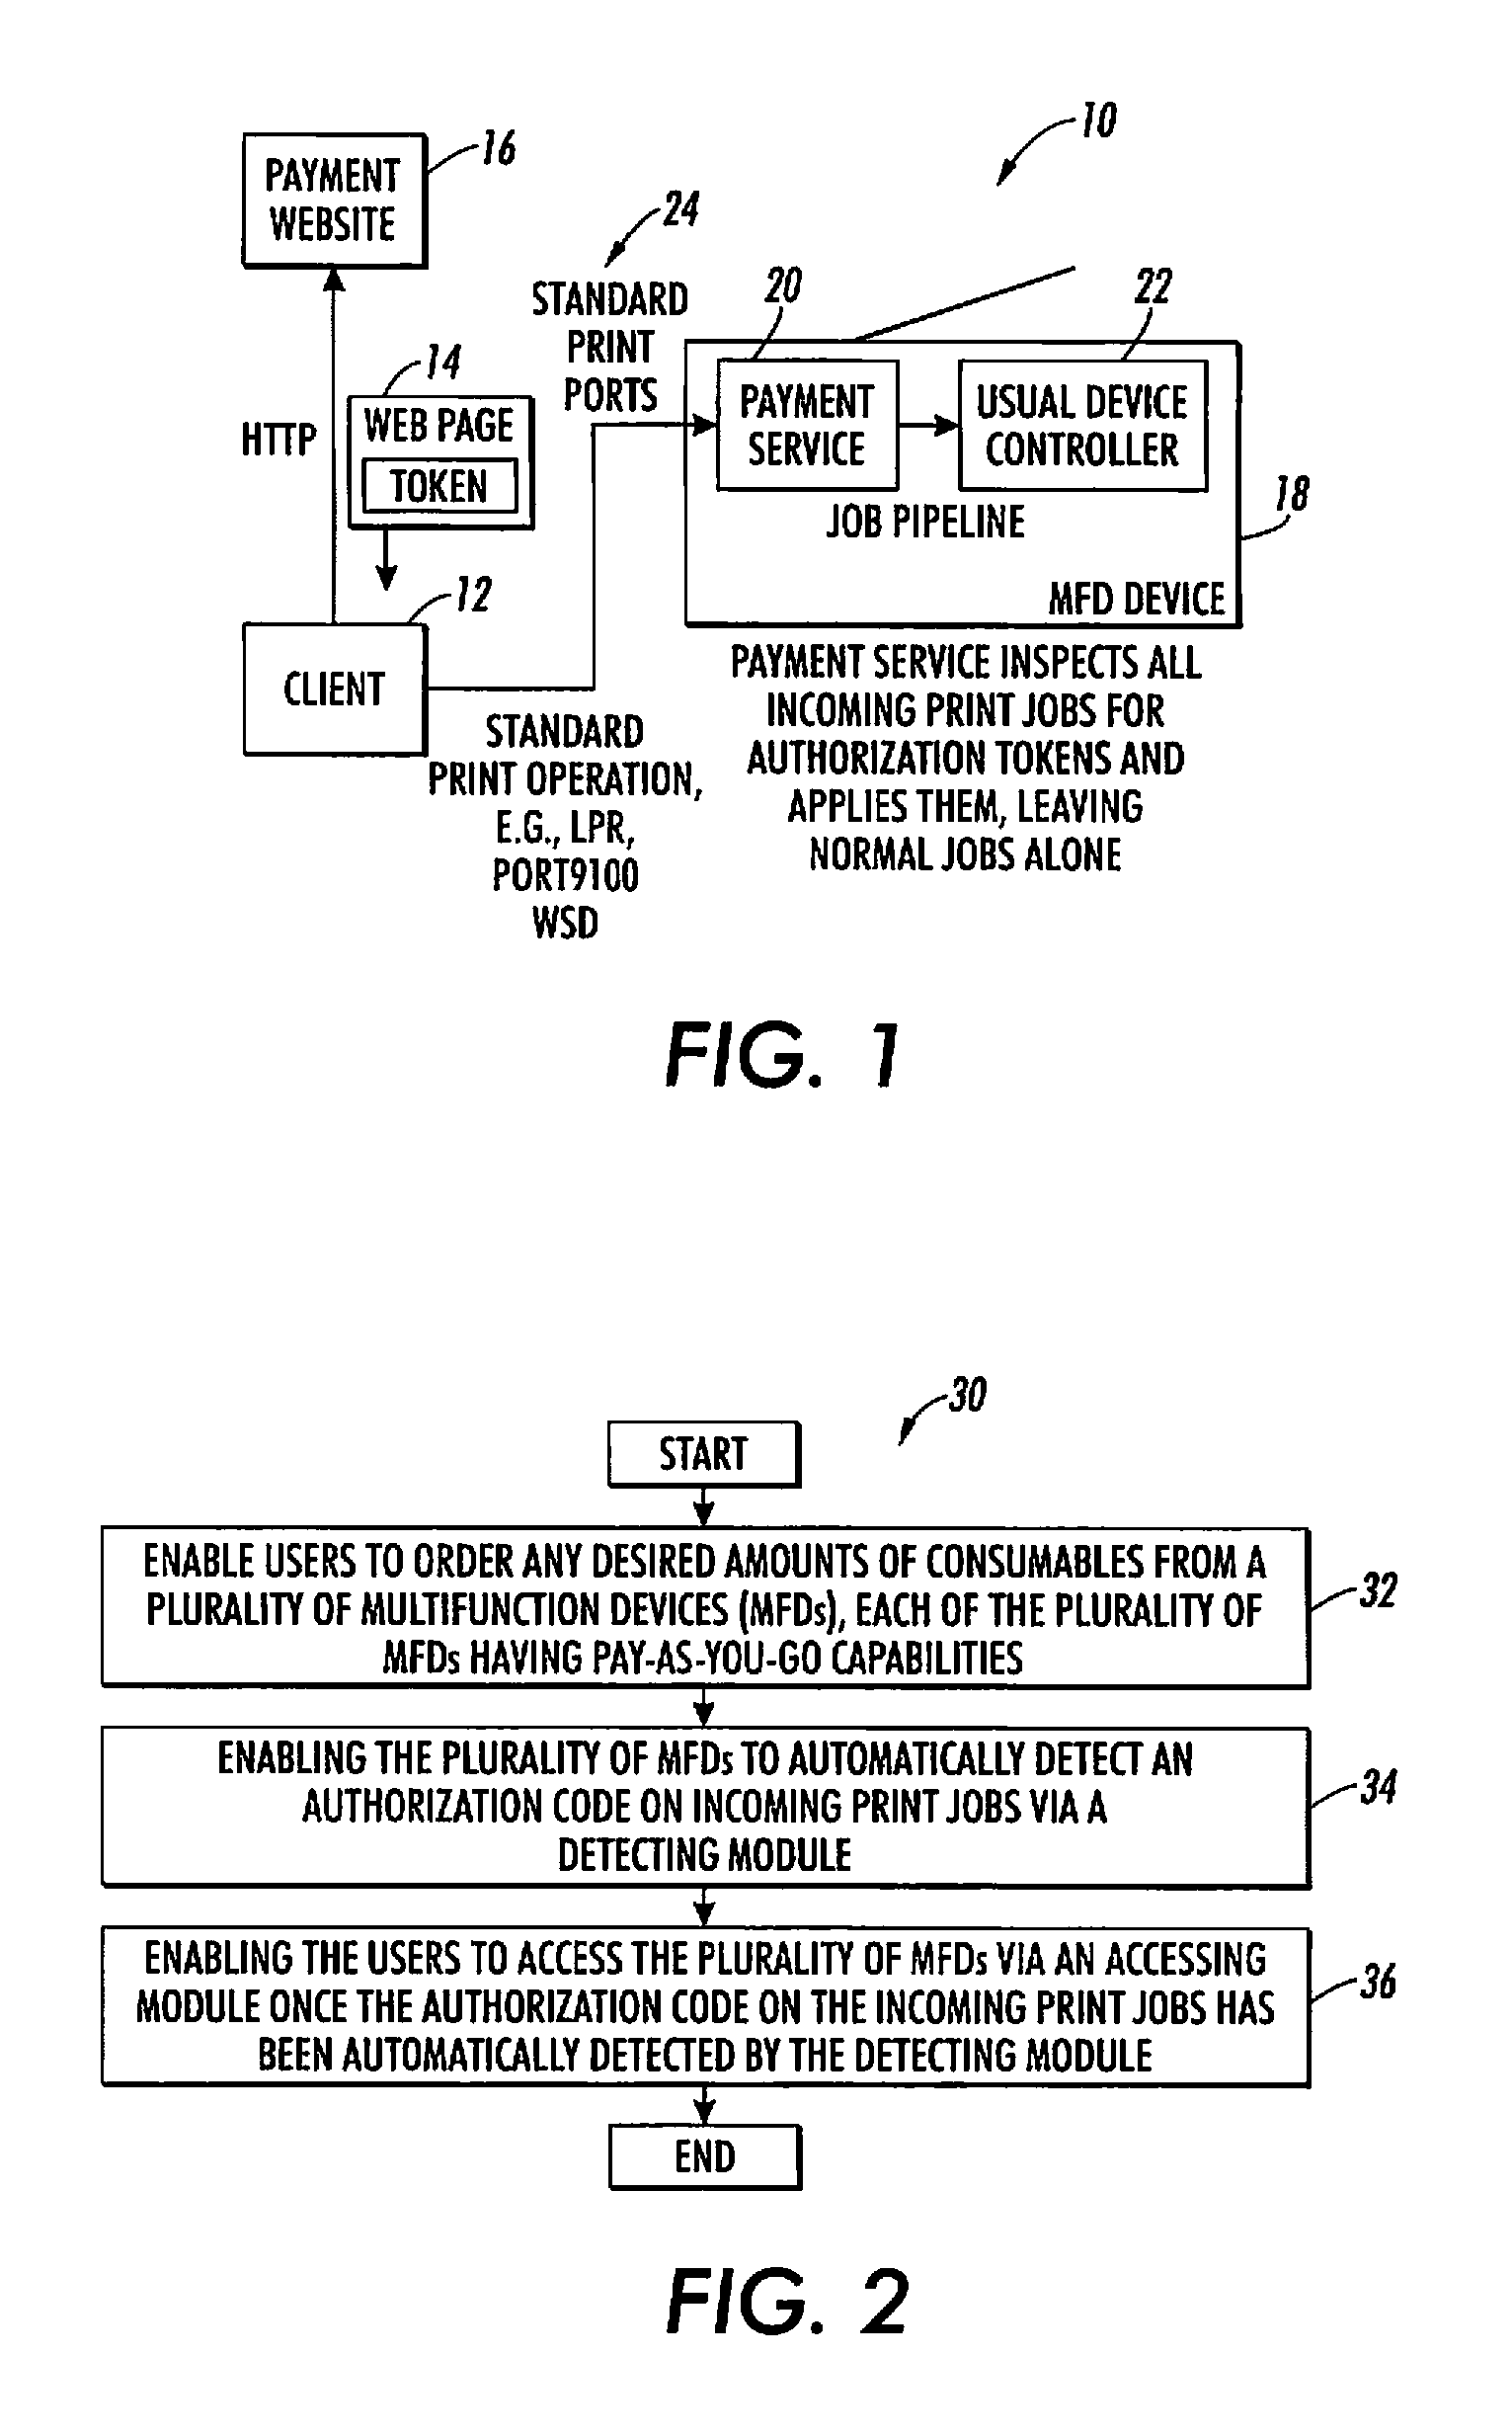 Method and system for transmitting proof of payment for "pay-as-you-go" multi-function devices